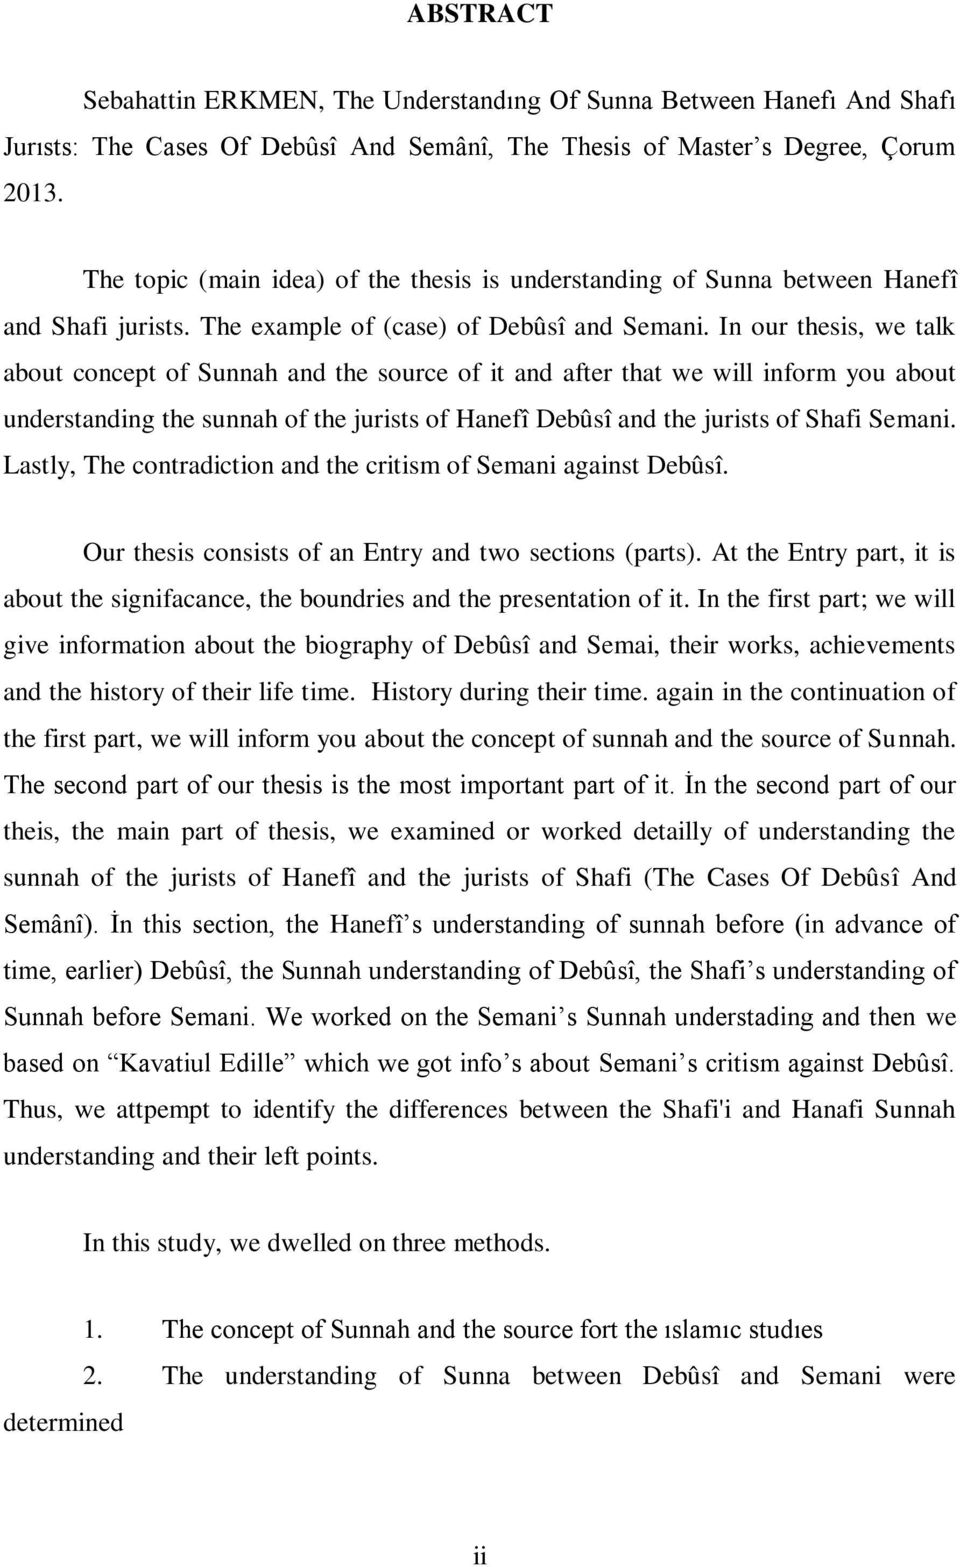 In our thesis, we talk about concept of Sunnah and the source of it and after that we will inform you about understanding the sunnah of the jurists of Hanefî Debûsî and the jurists of Shafi Semani.